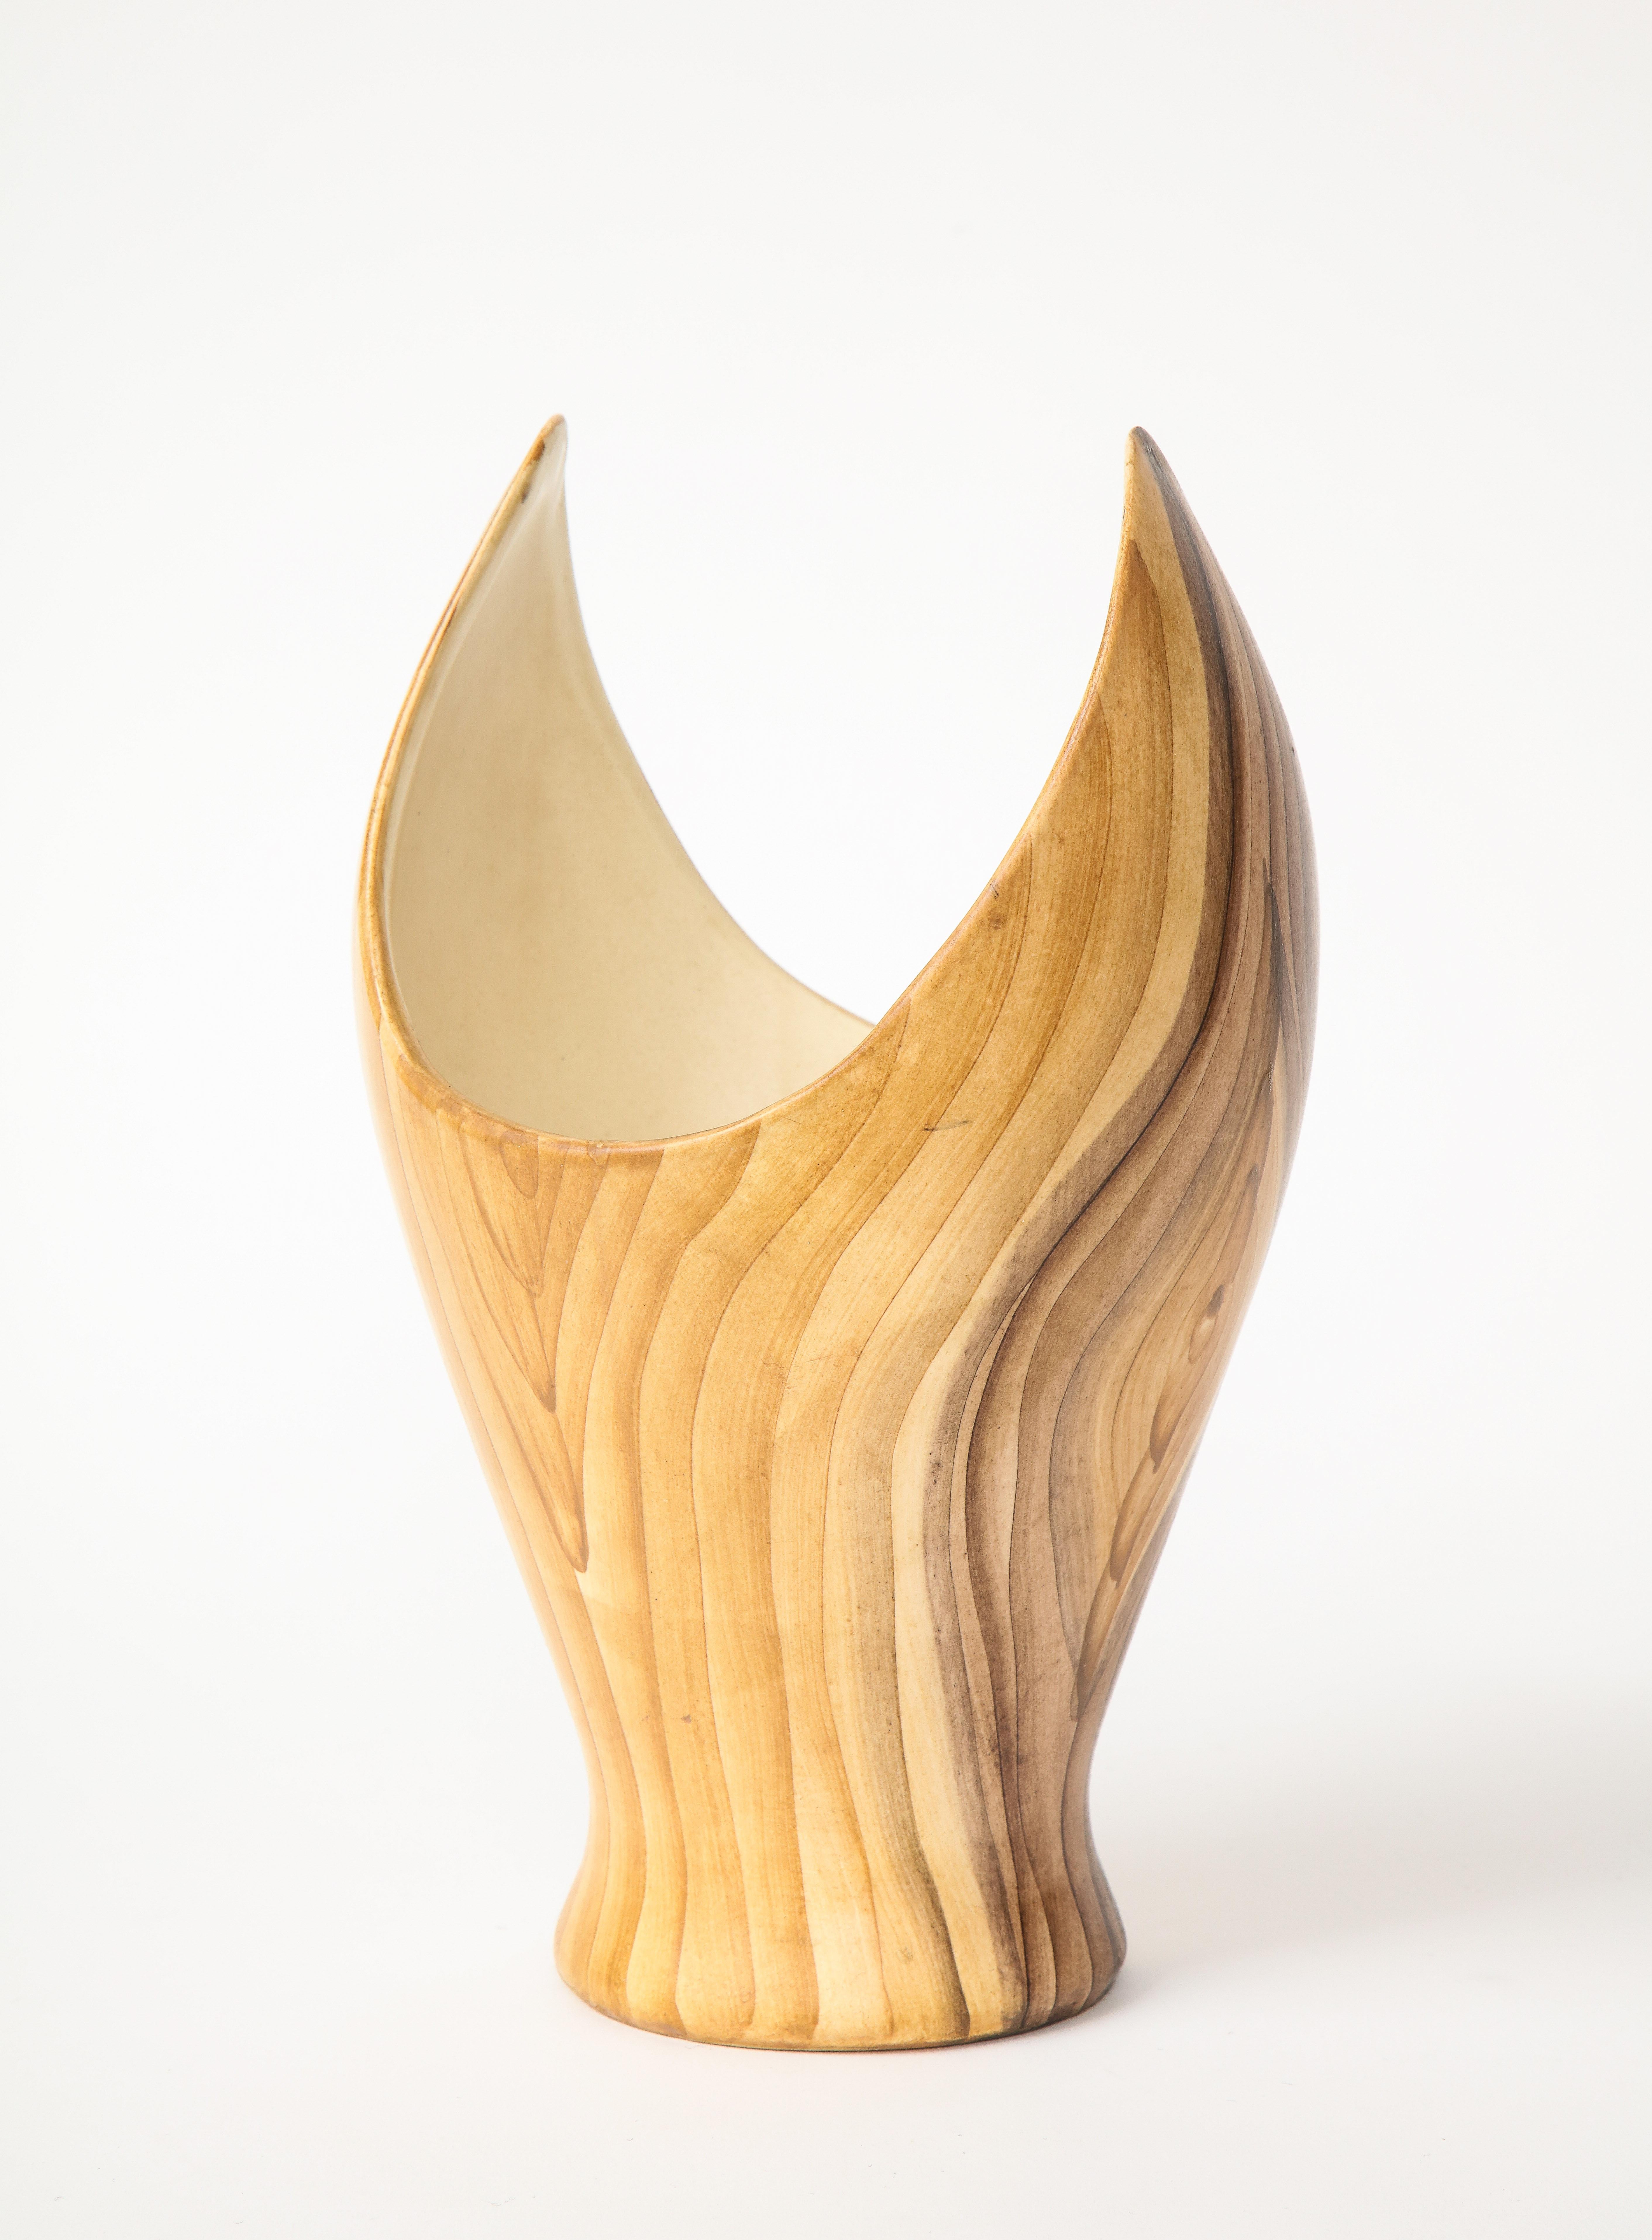 Faux Bois Ceramic Vase by Grandjean Jourdan, Vallauris, France, c. 1960s (Signed) 

This vase displays the acclaimed French ceramicist's trademark 